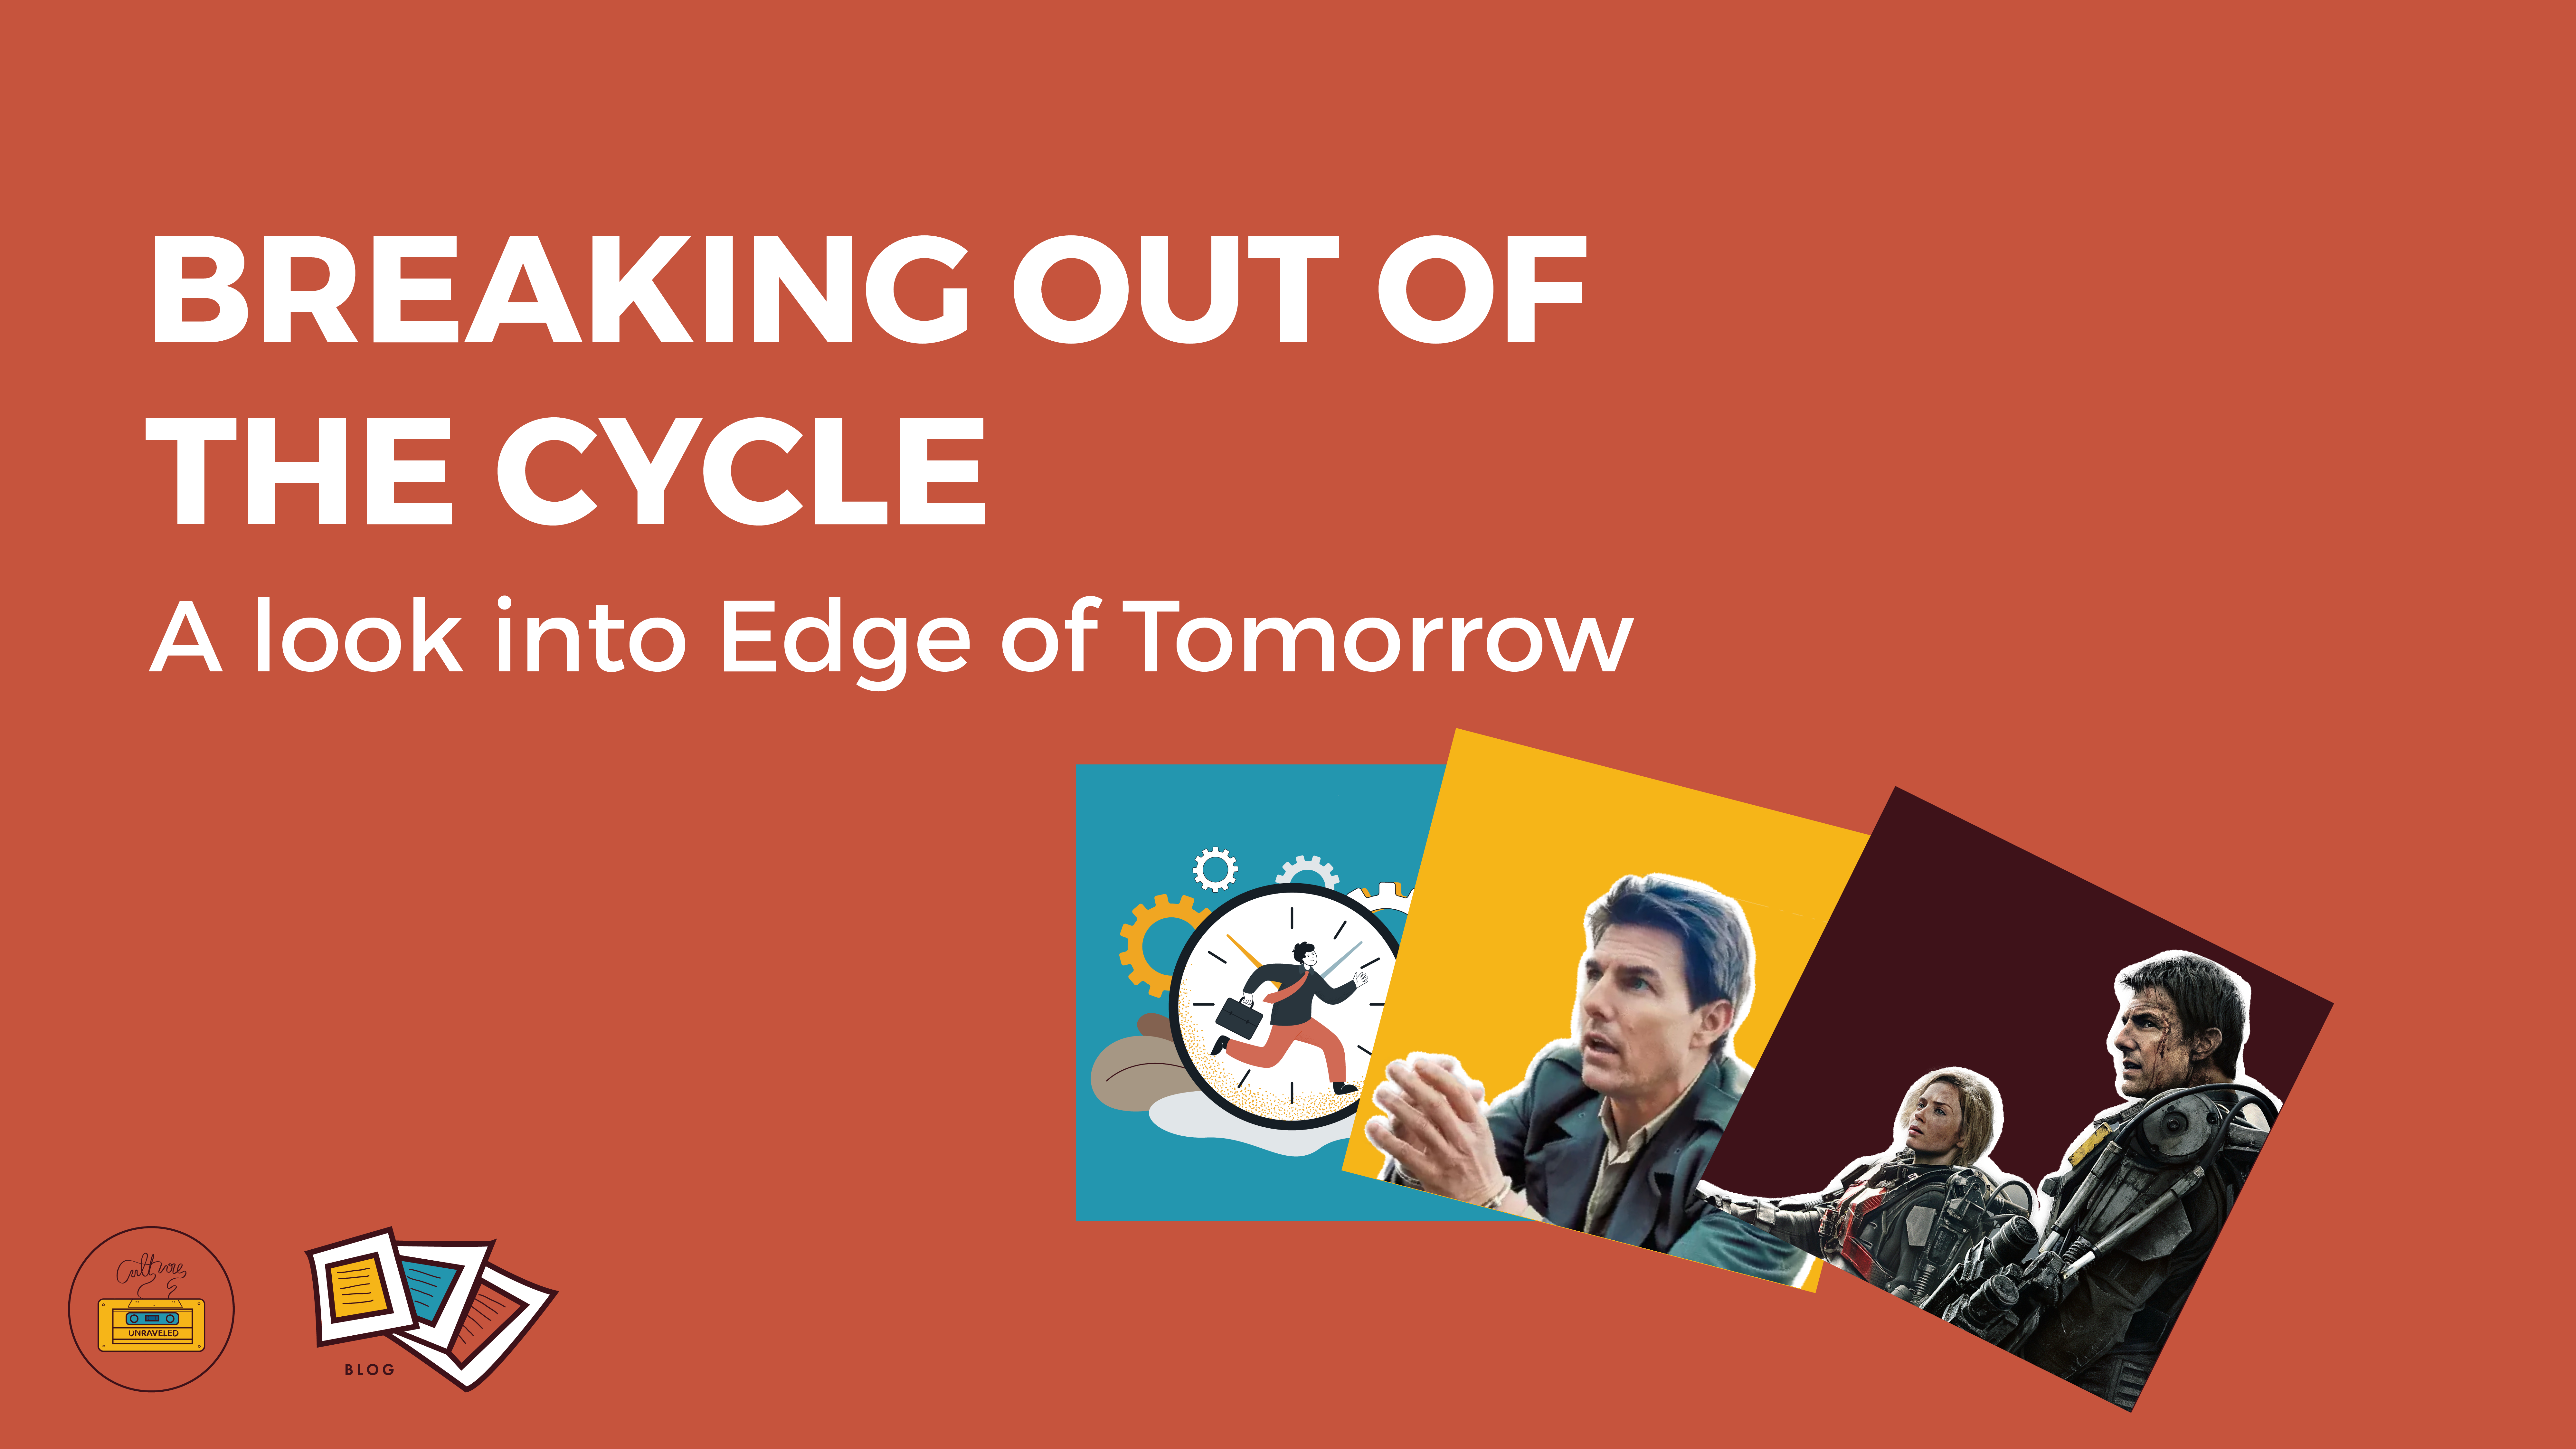 Breaking Out of the Cycle – A look into Edge of Tomorrow